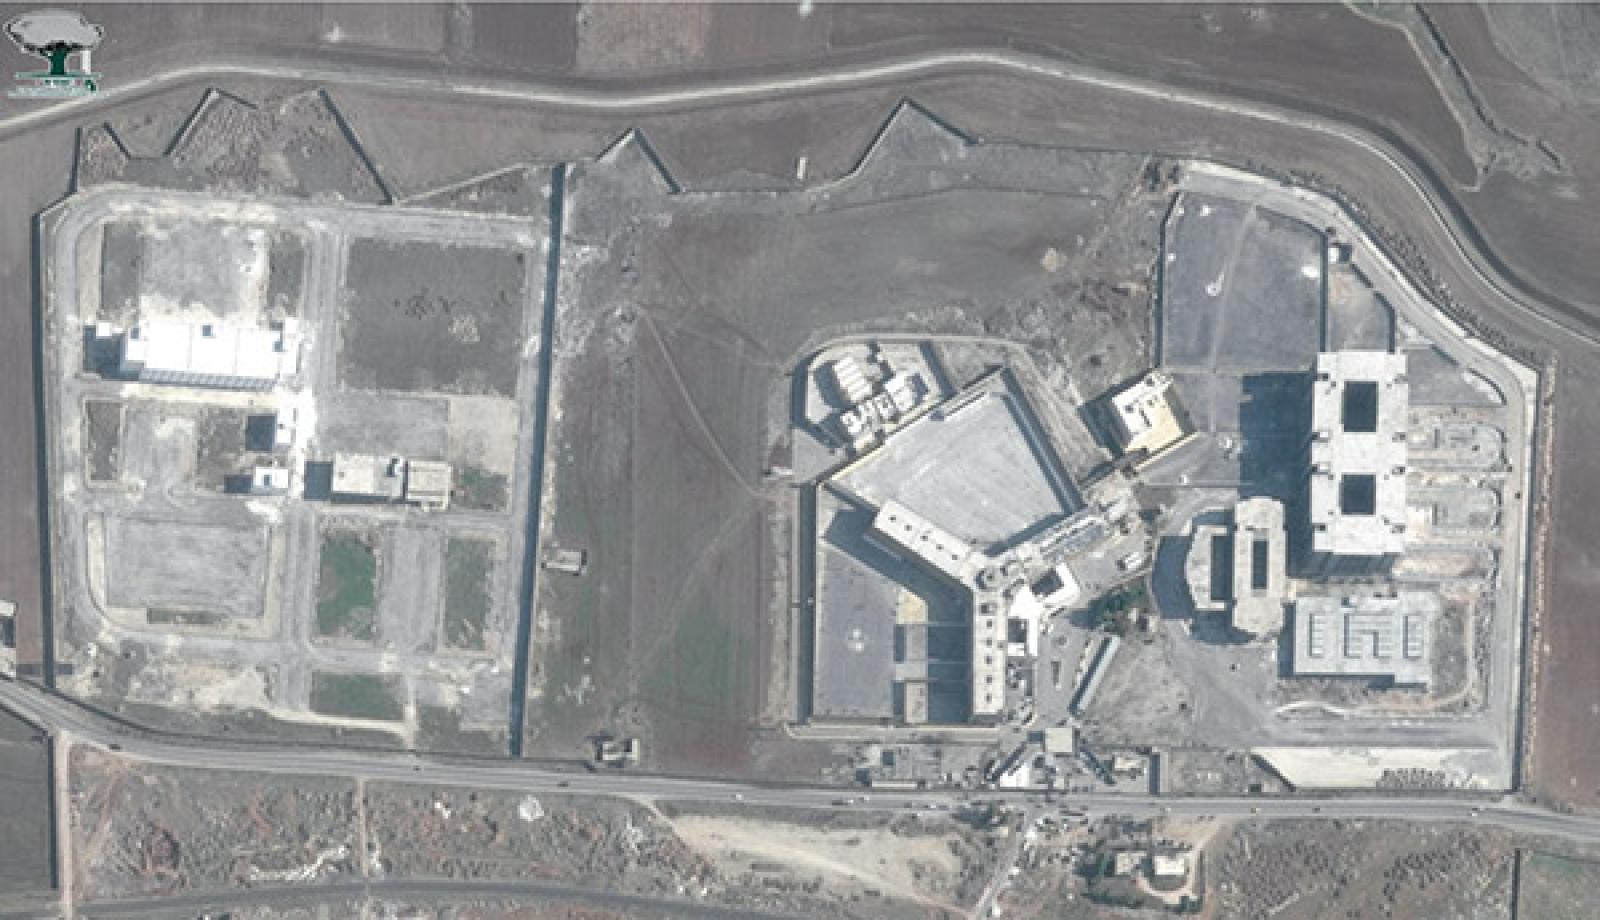 A satellite image of Aleppo Central Prison before the outbreak of the military strikes in its vicinity, showing the three parts of the prison